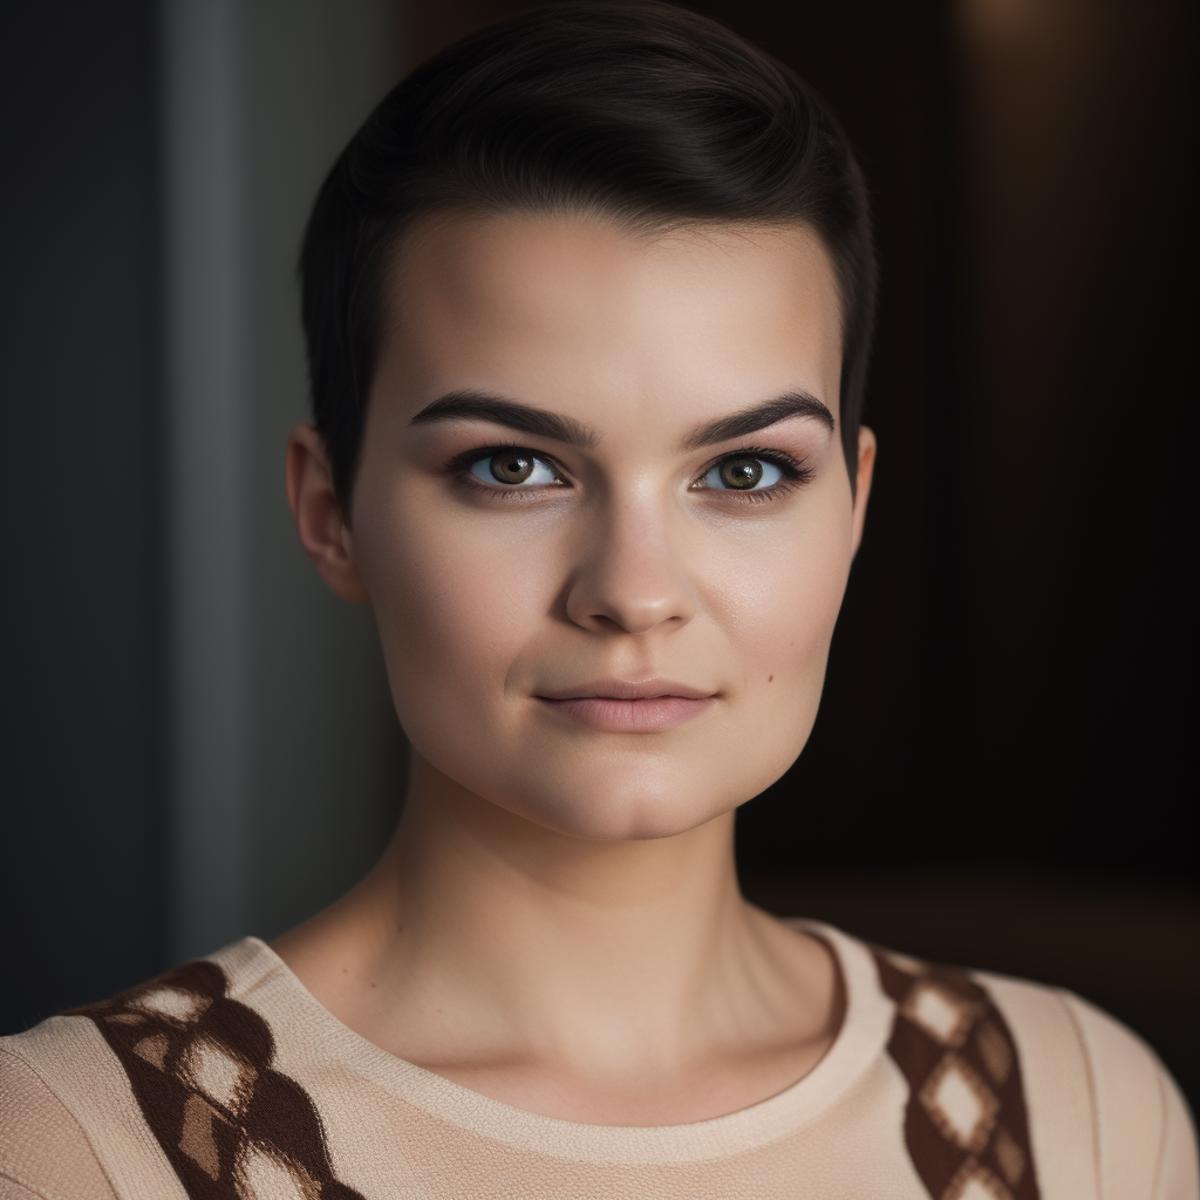 Brianna Hildebrand image by infamous__fish